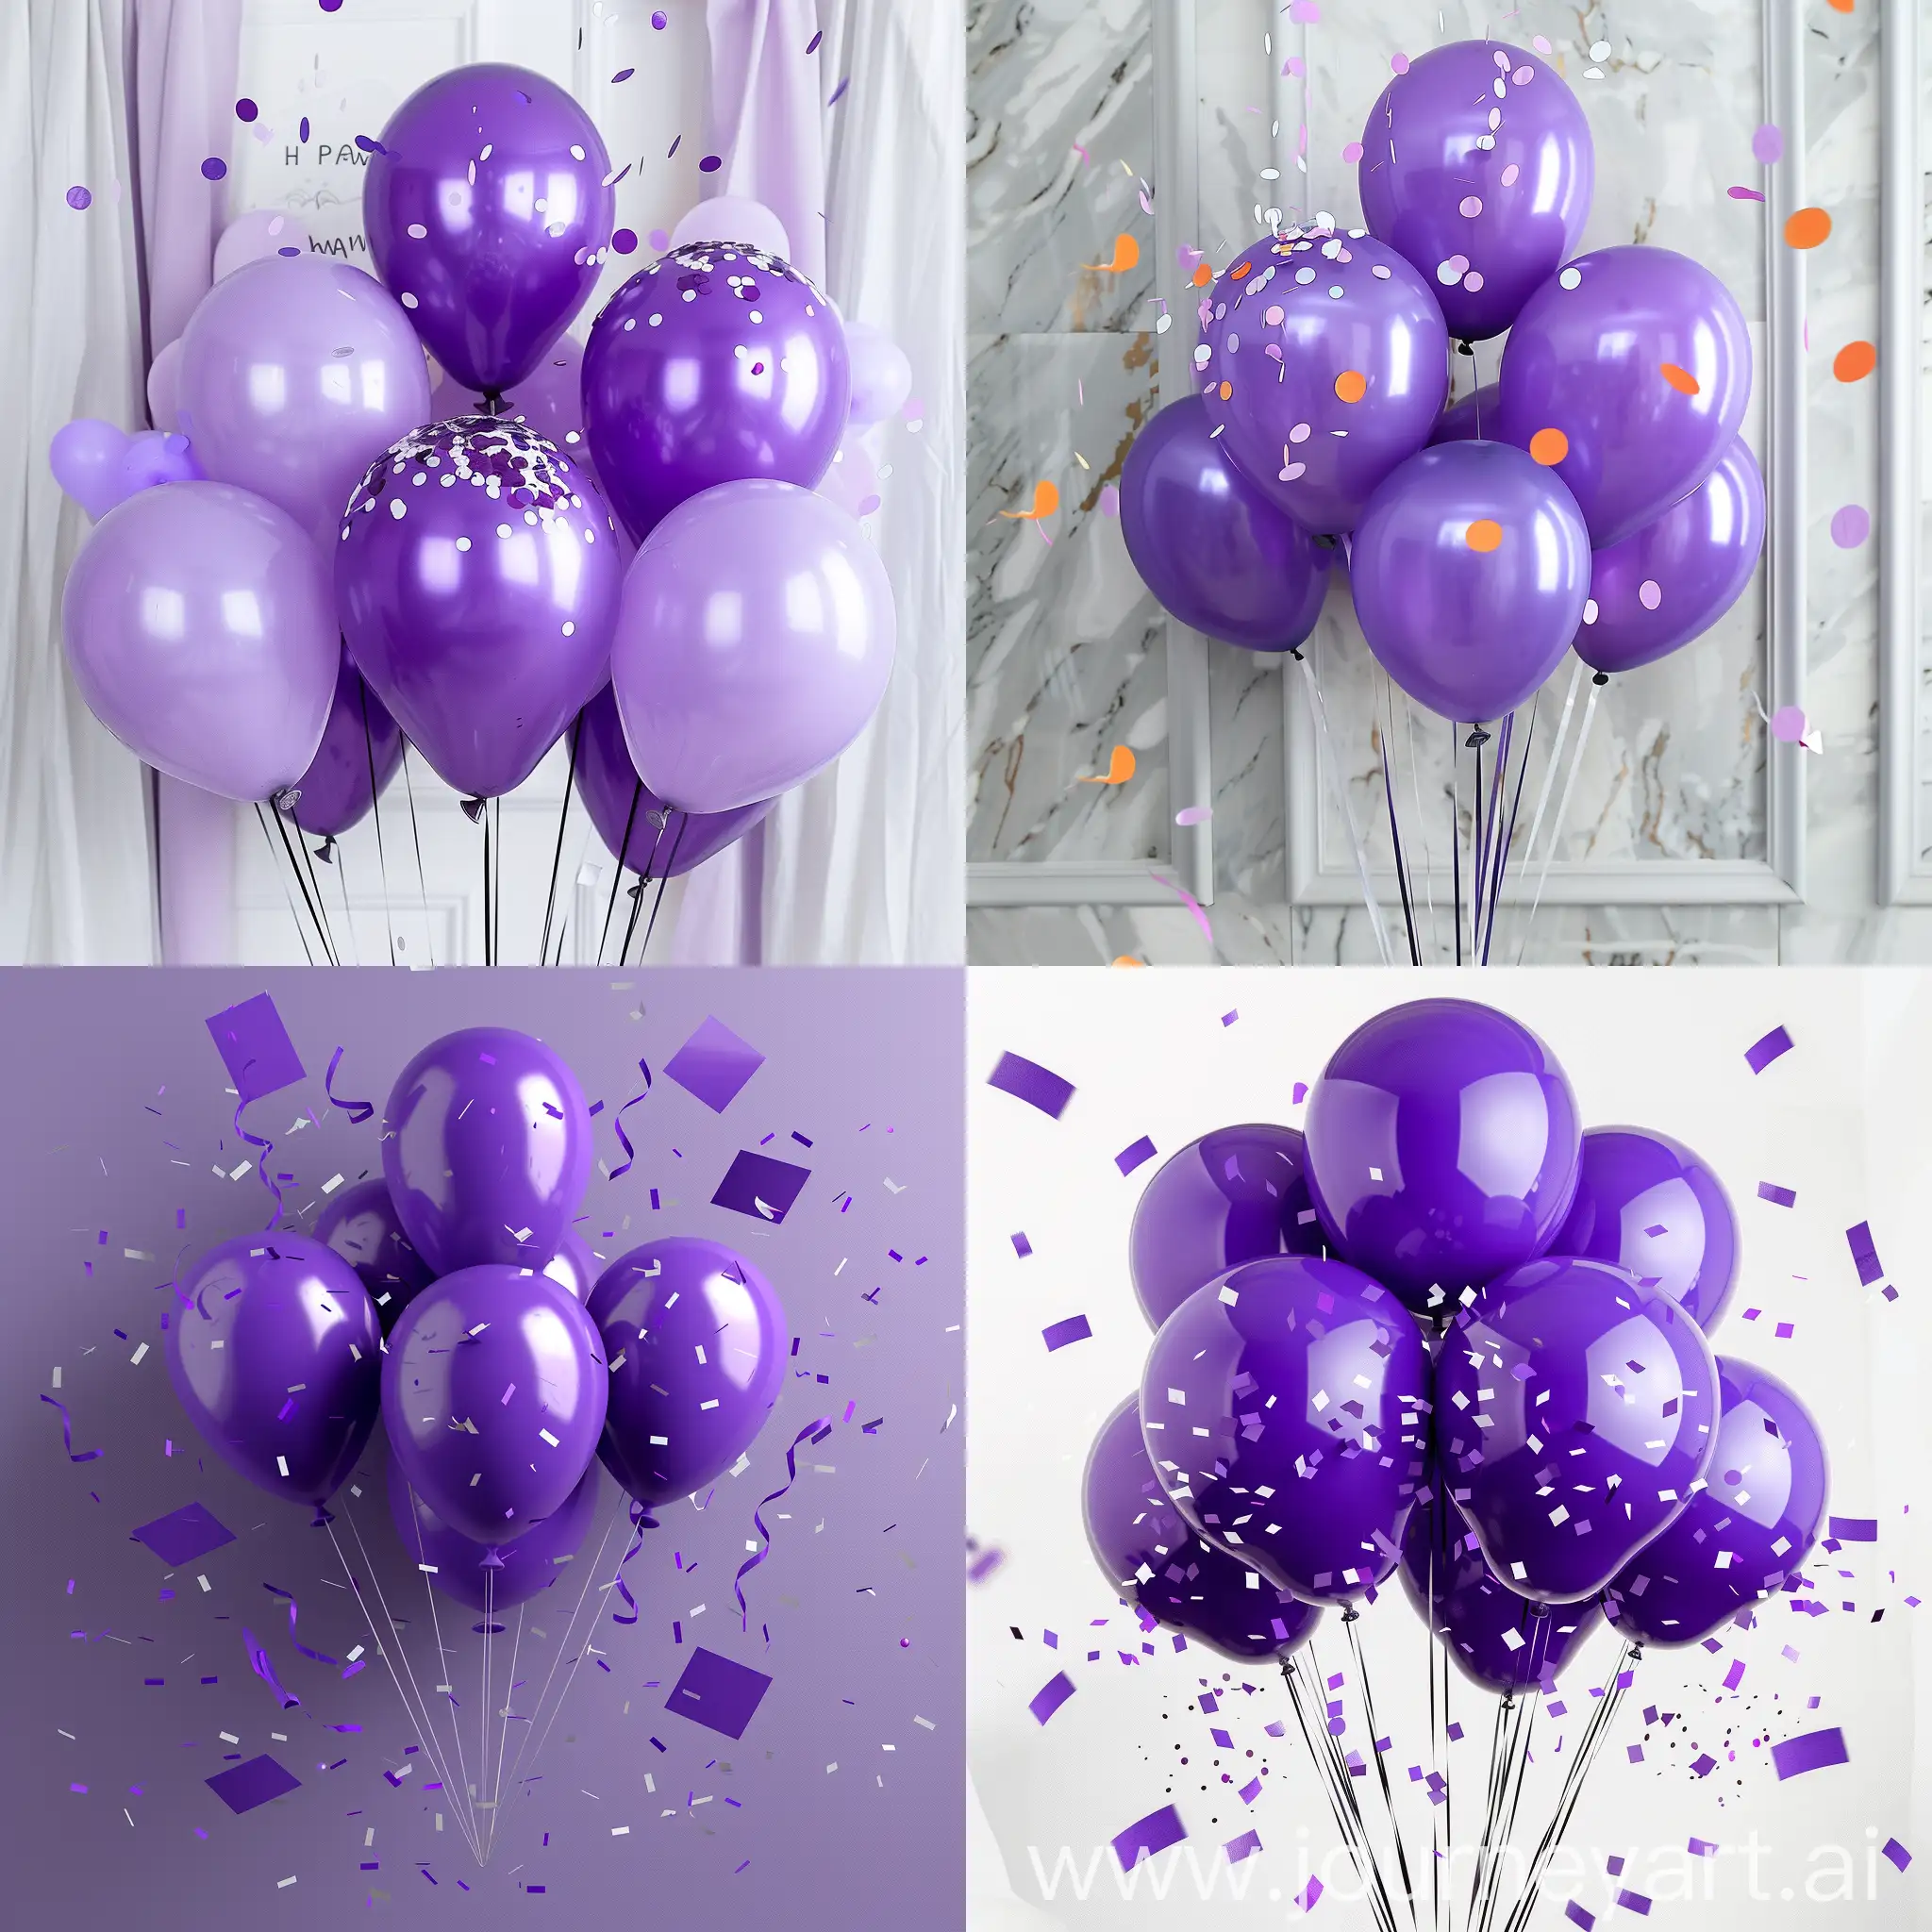 Celebratory-Purple-Party-Balloons-and-Confetti-for-Happy-Anniversary